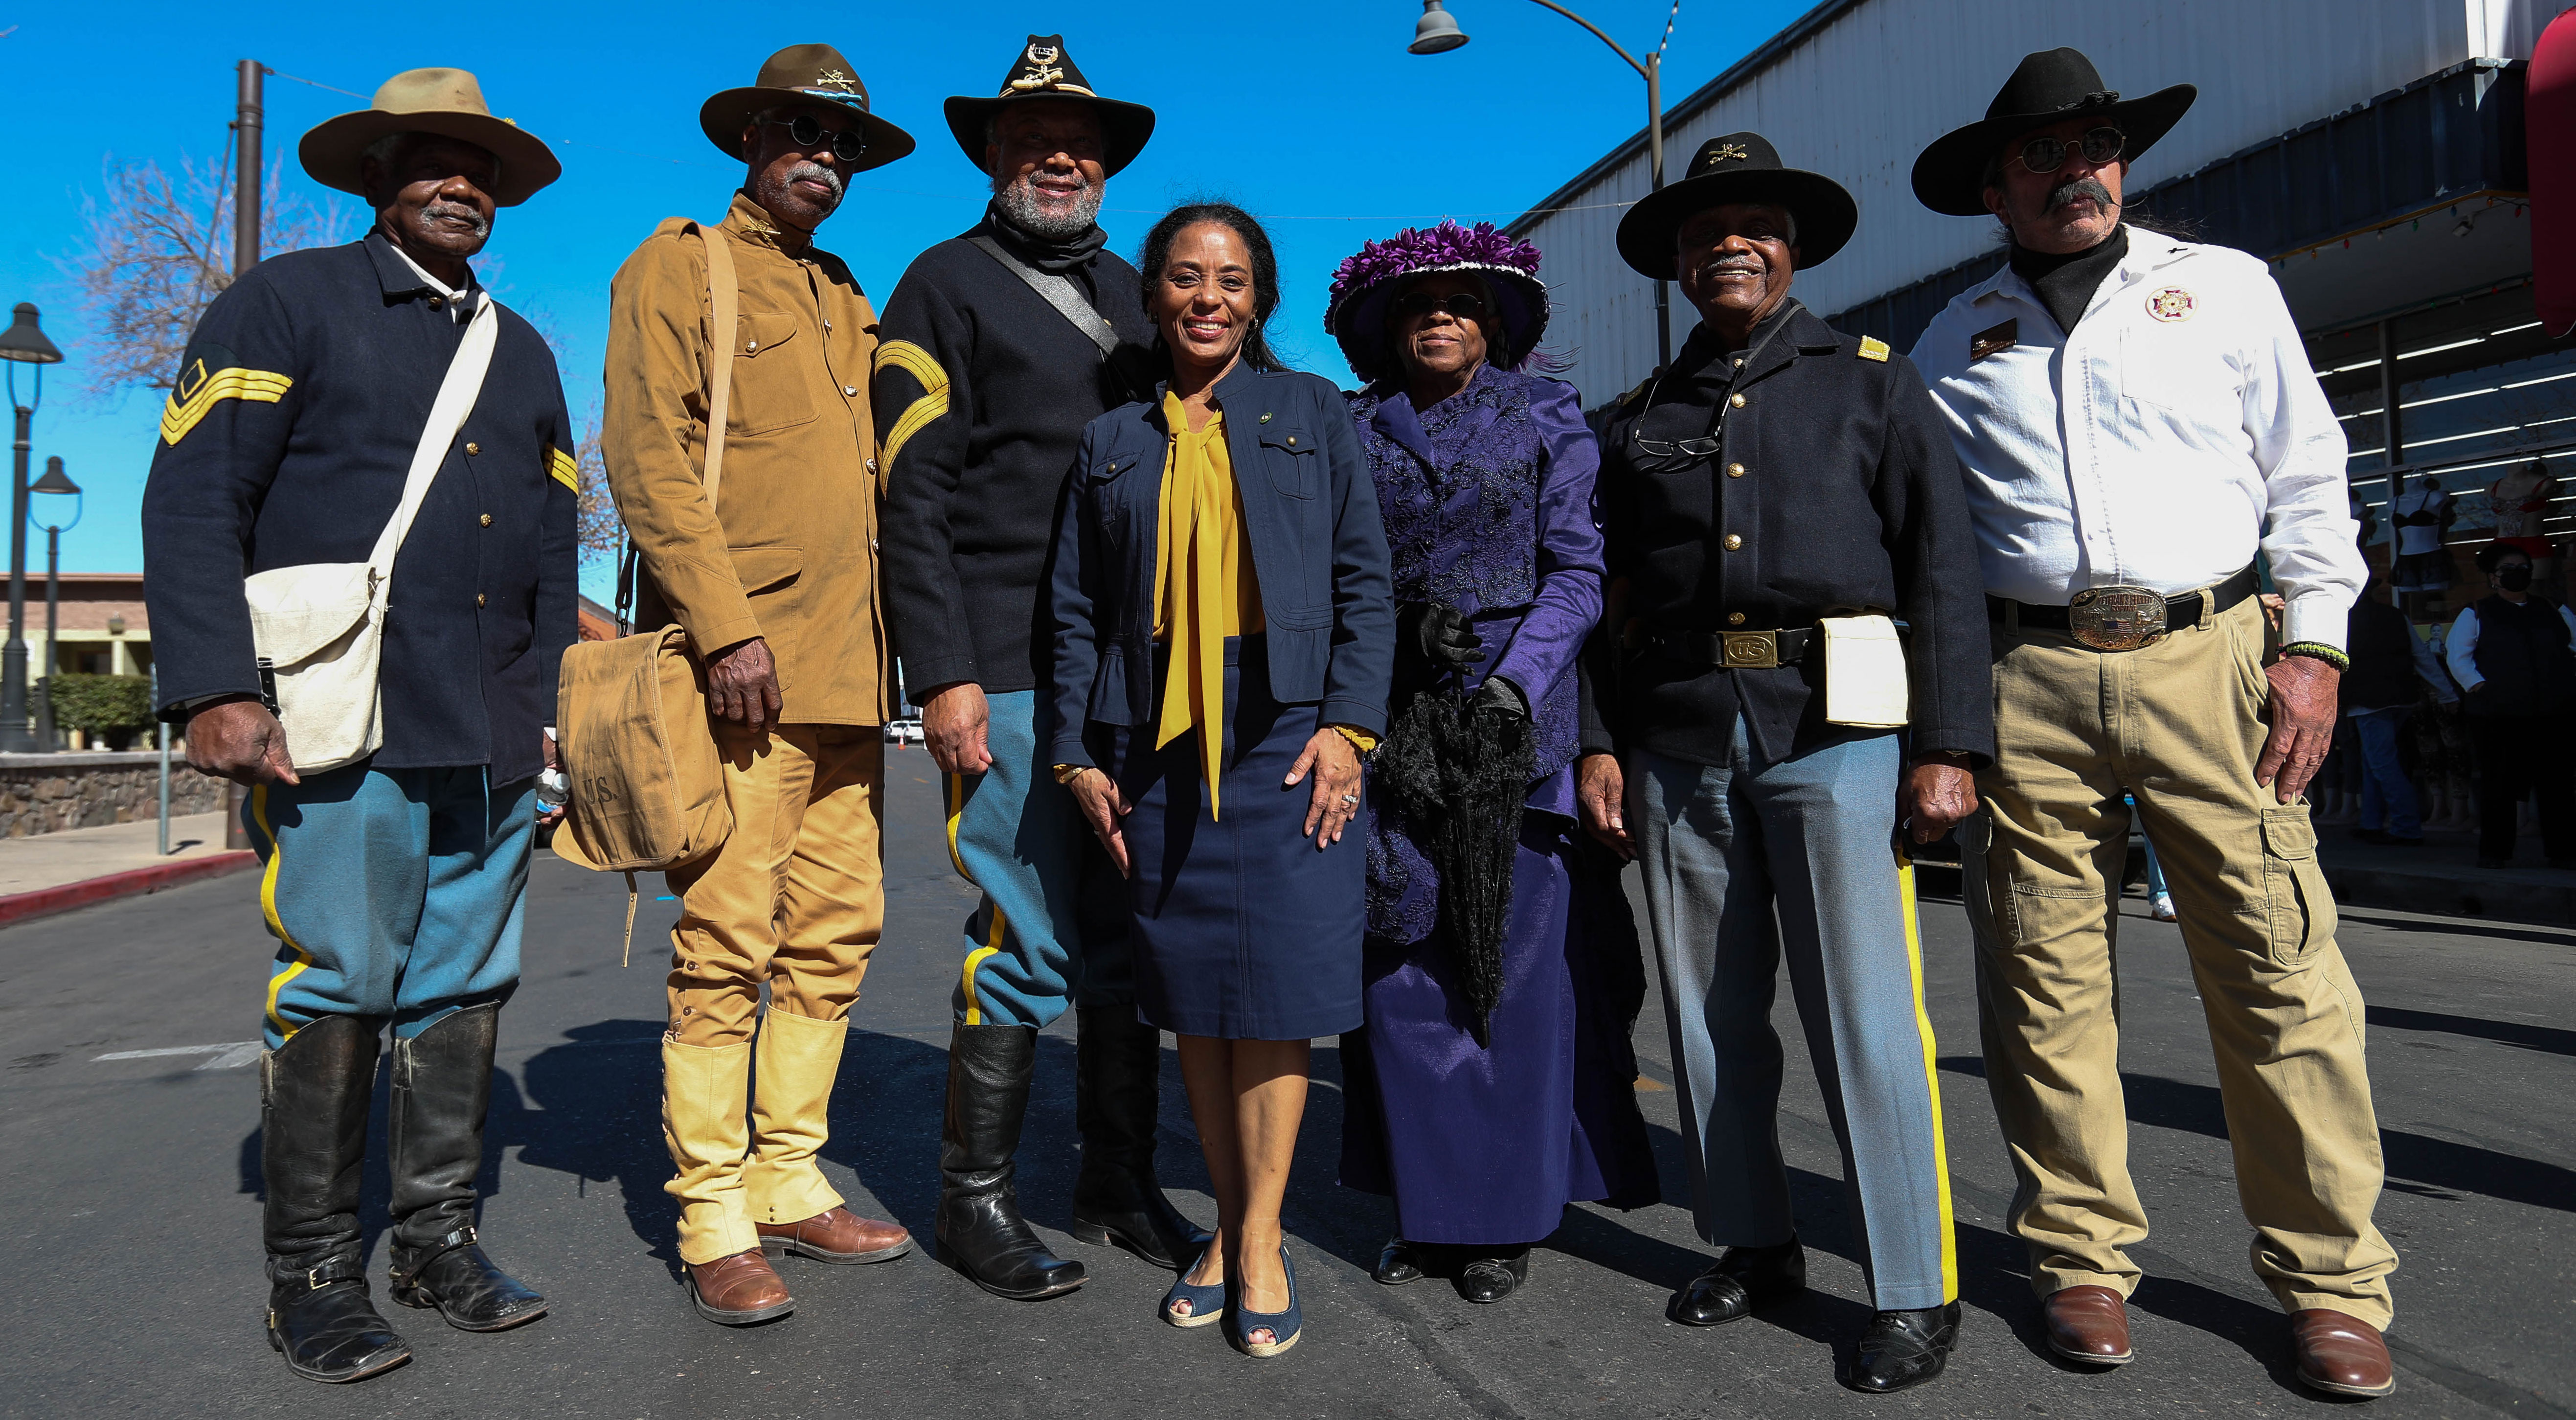 The Nogales Buffalo Soldiers tribute was held for the first time in 2022, when this photo was taken. 